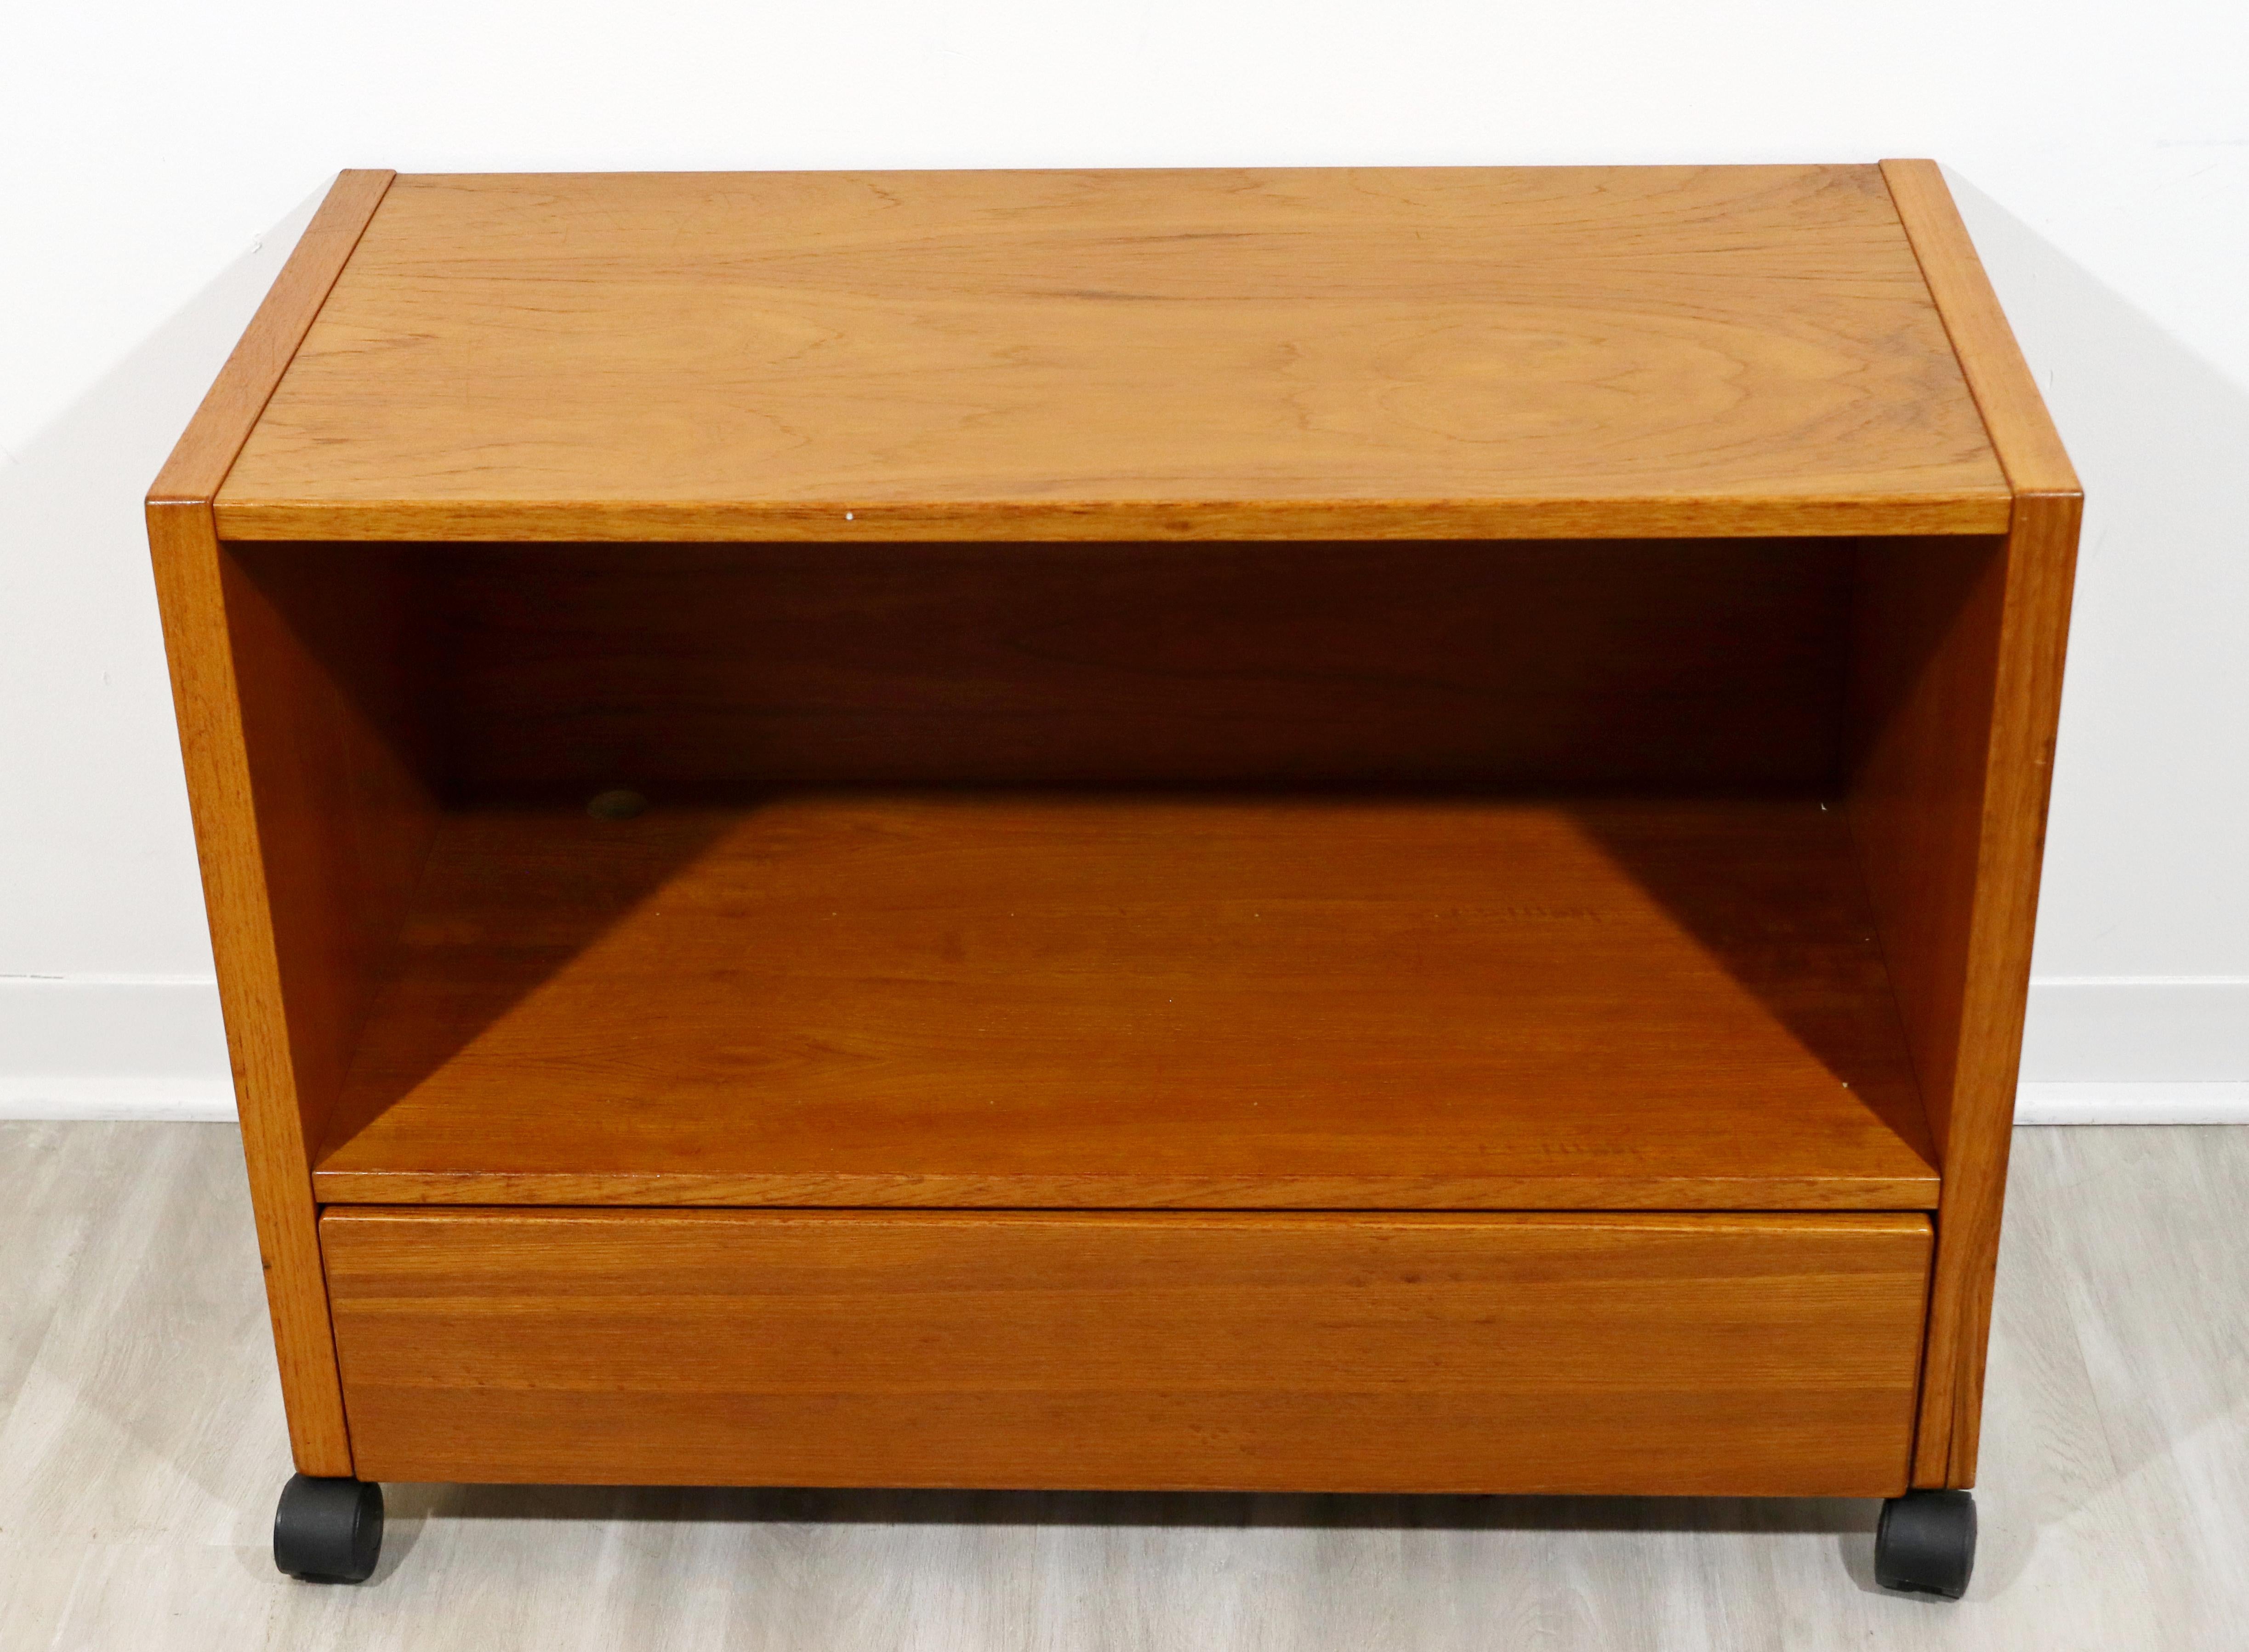 For your consideration is a terrific, teak serving or bar cart, with a drawer, made in Denmark, by Jesper International, circa the 1960s. In very good vintage condition. The dimensions are 33.5